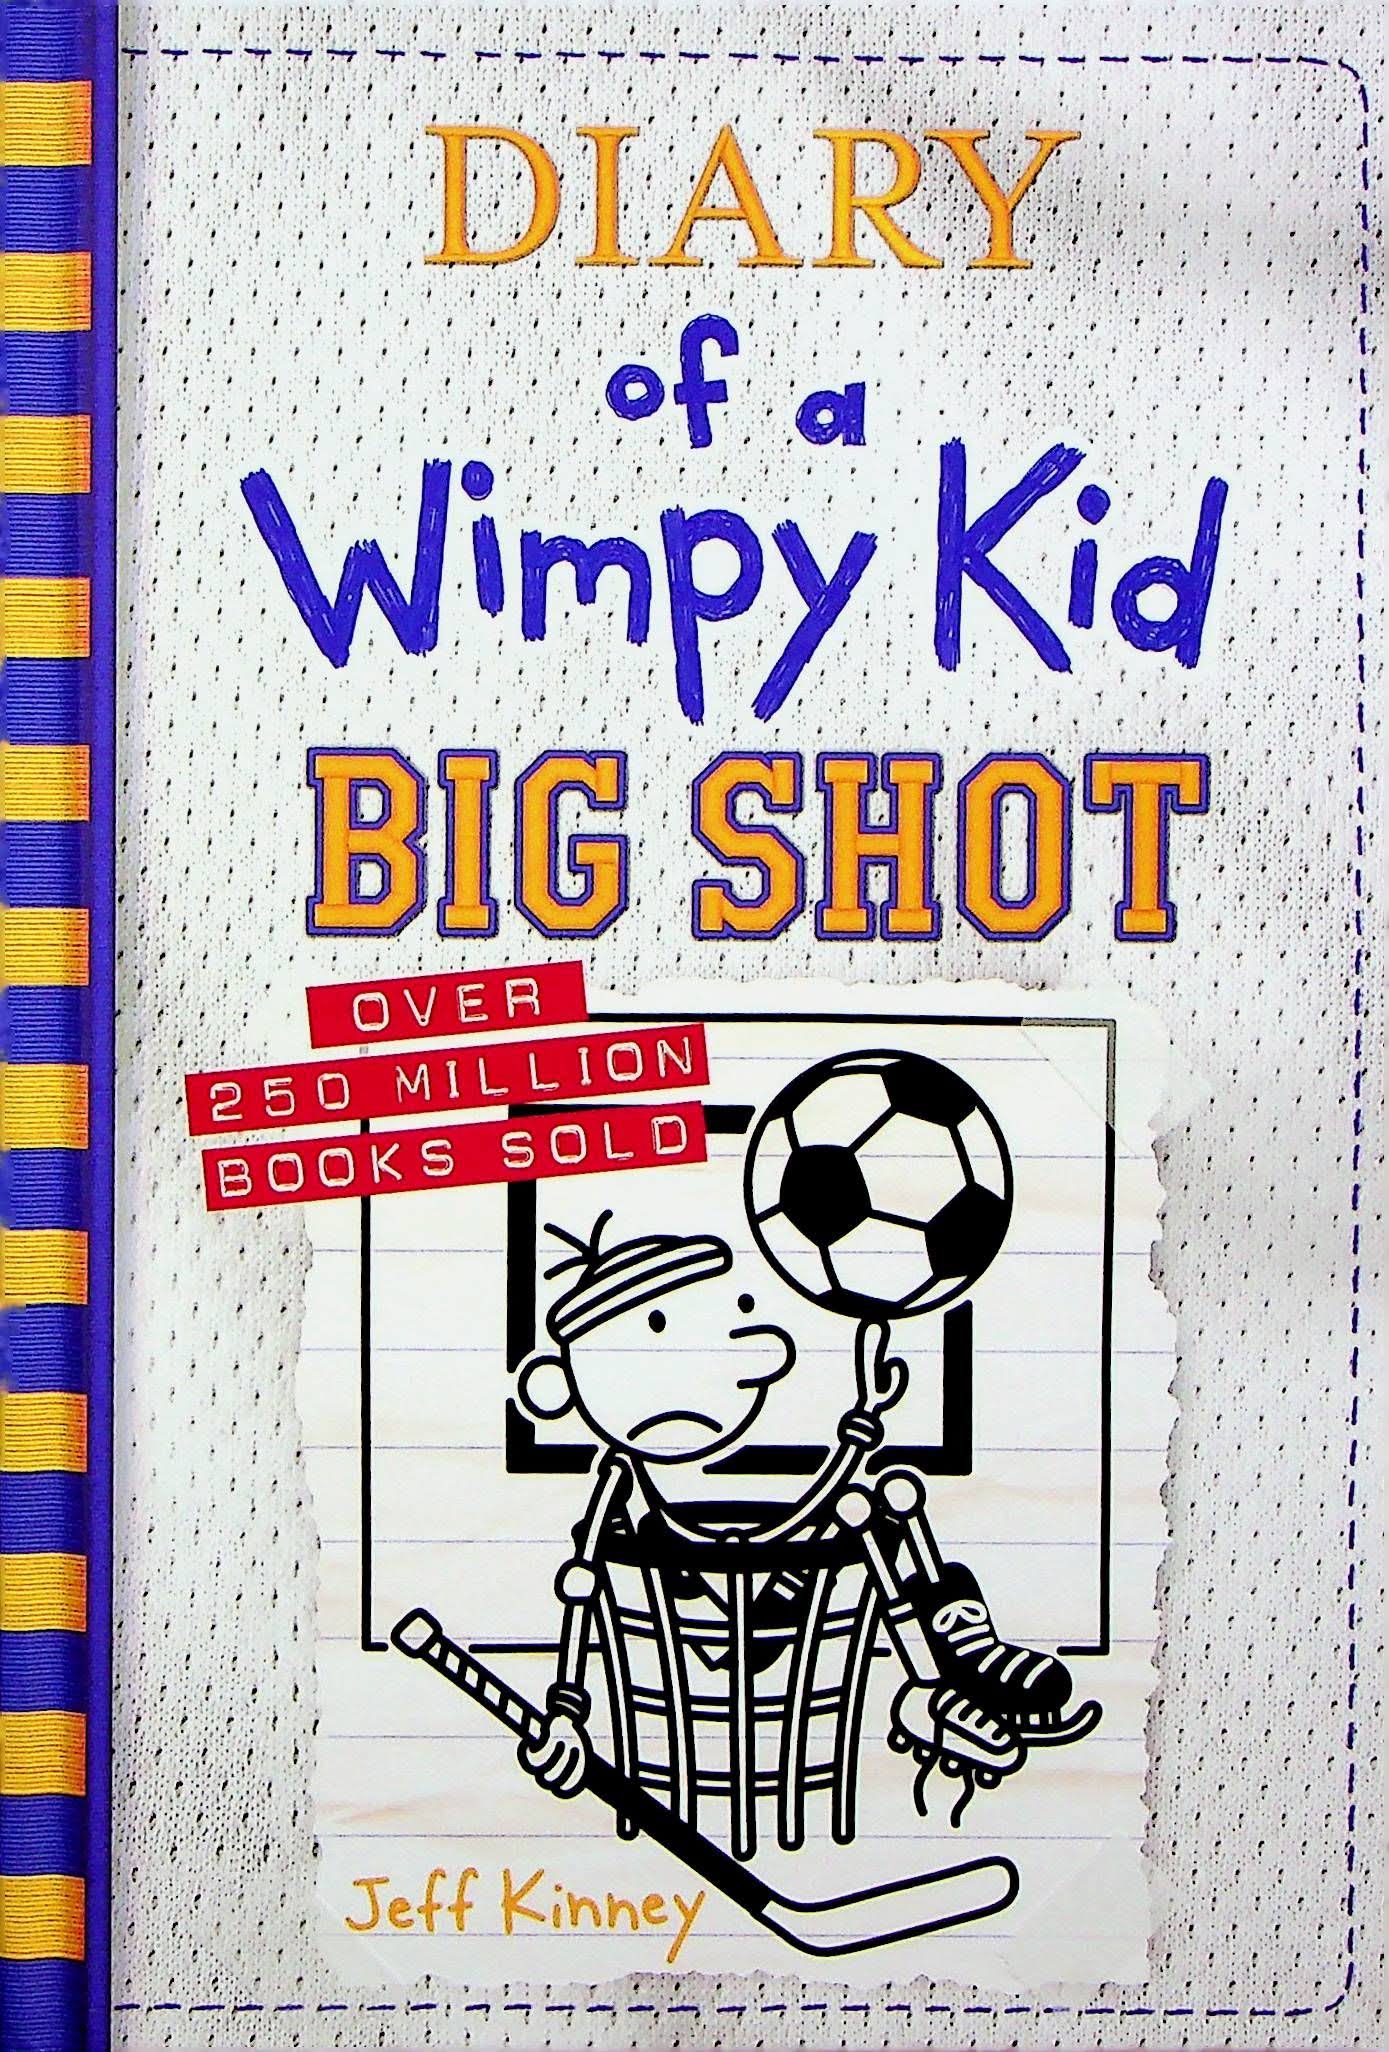 Big Shot (Diary of A Wimpy Kid Book 16) by Kinney, Jeff